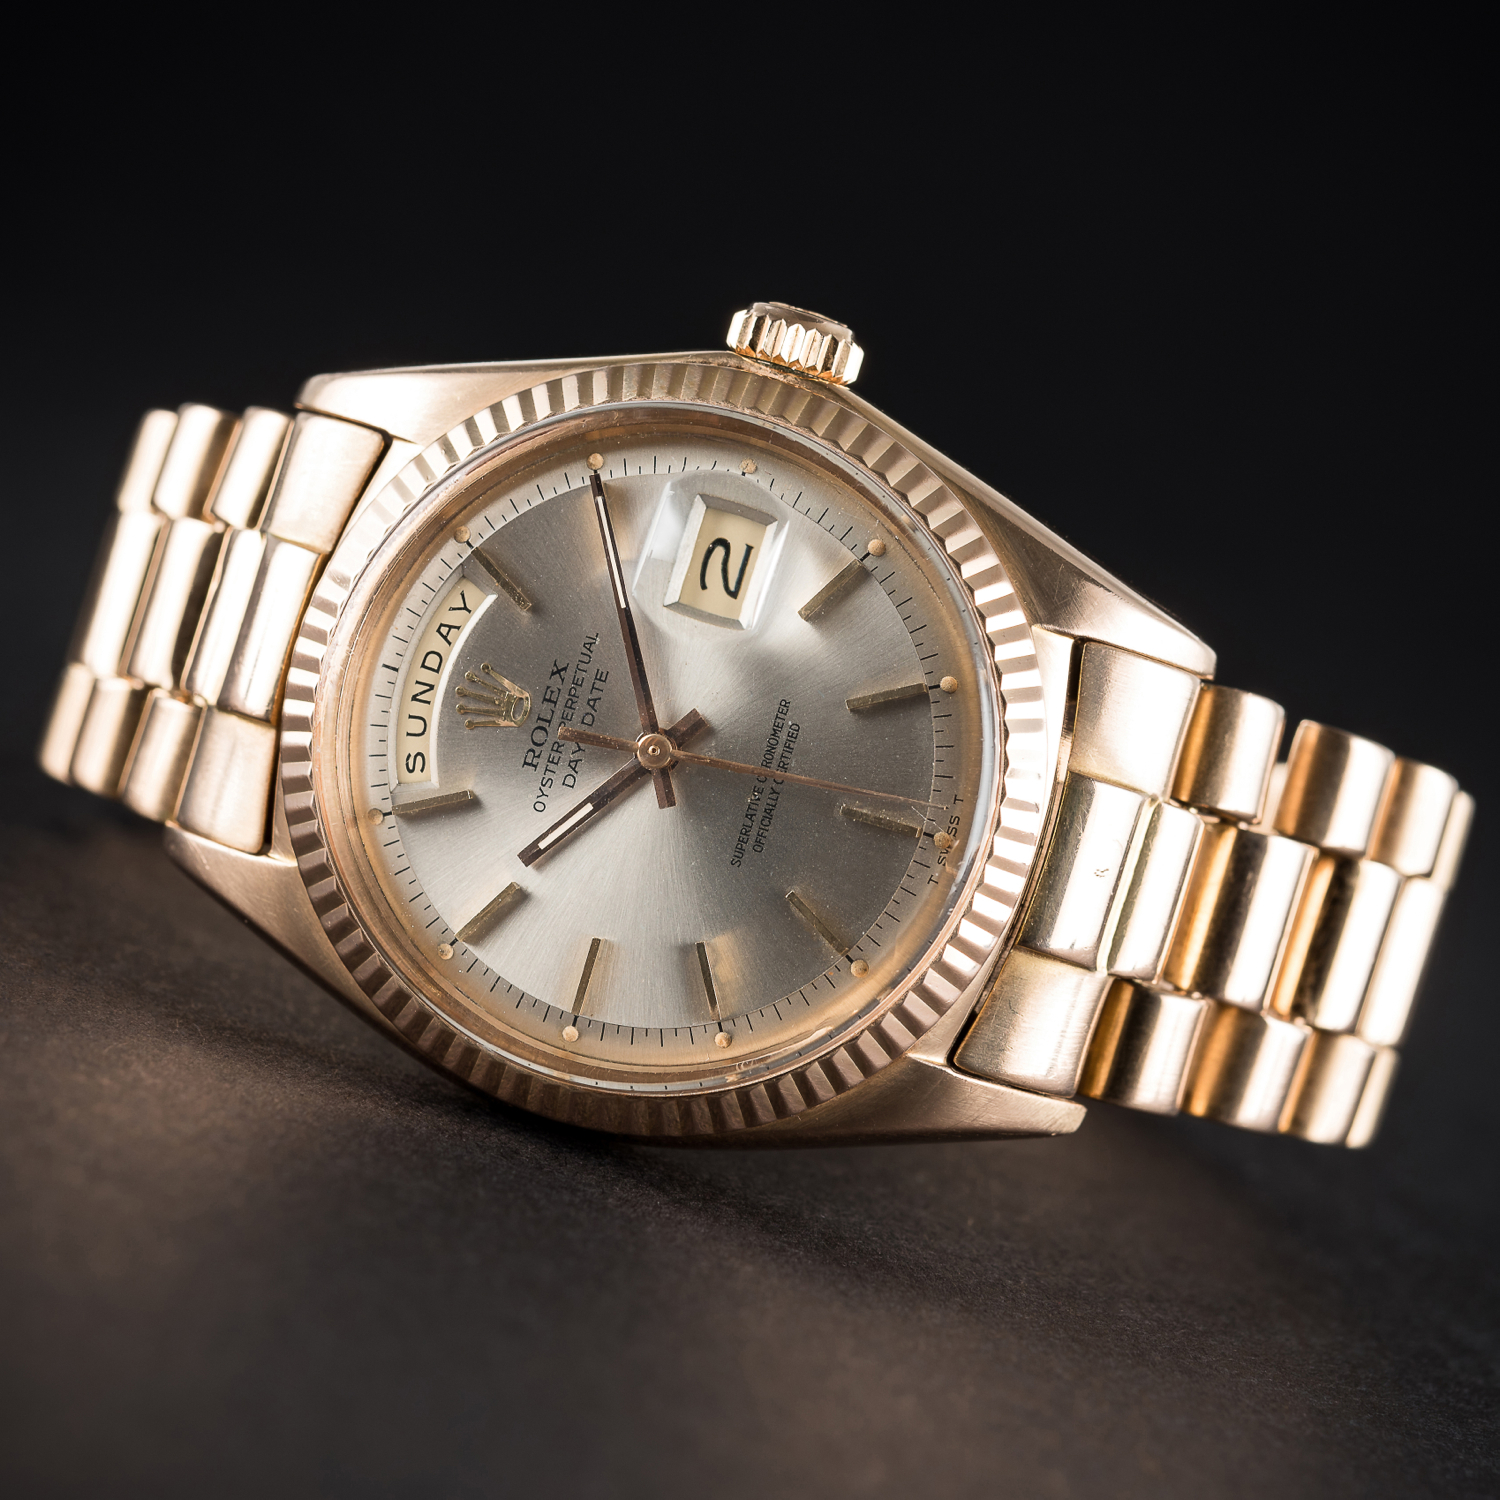 A RARE GENTLEMAN'S 18K SOLID ROSE GOLD ROLEX OYSTER PERPETUAL DAY DATE BRACELET WATCH CIRCA 1968,